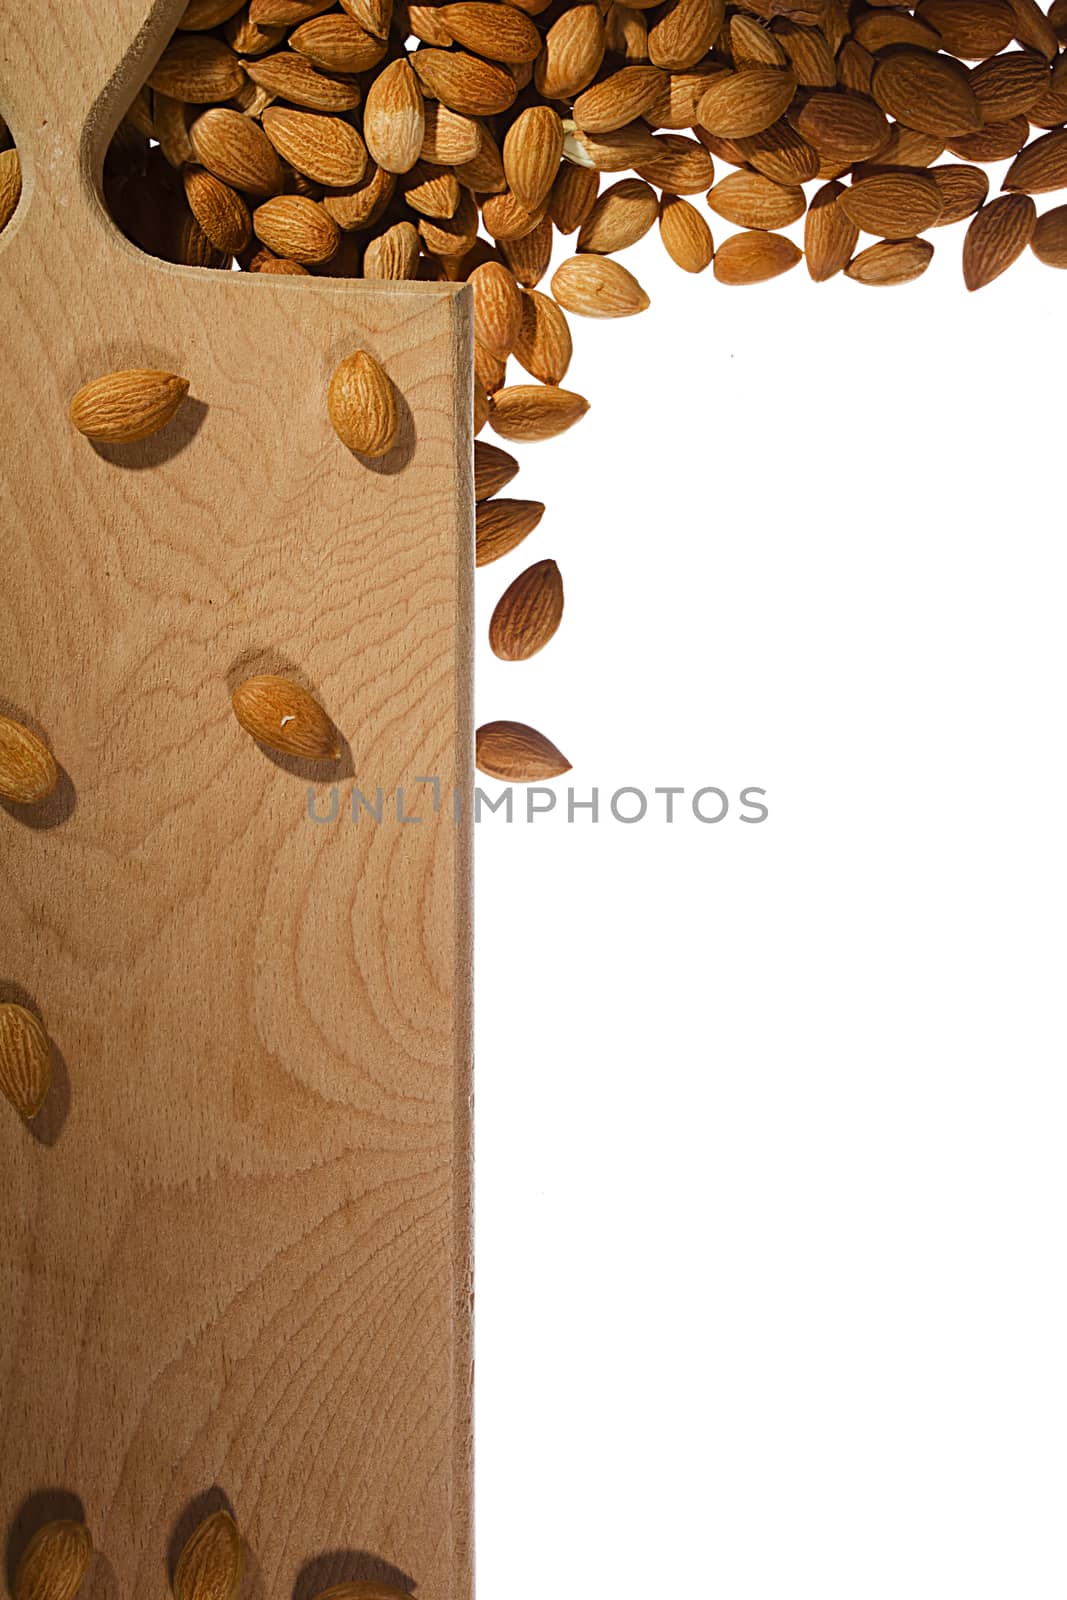 Cutting board and nuts by VIPDesignUSA